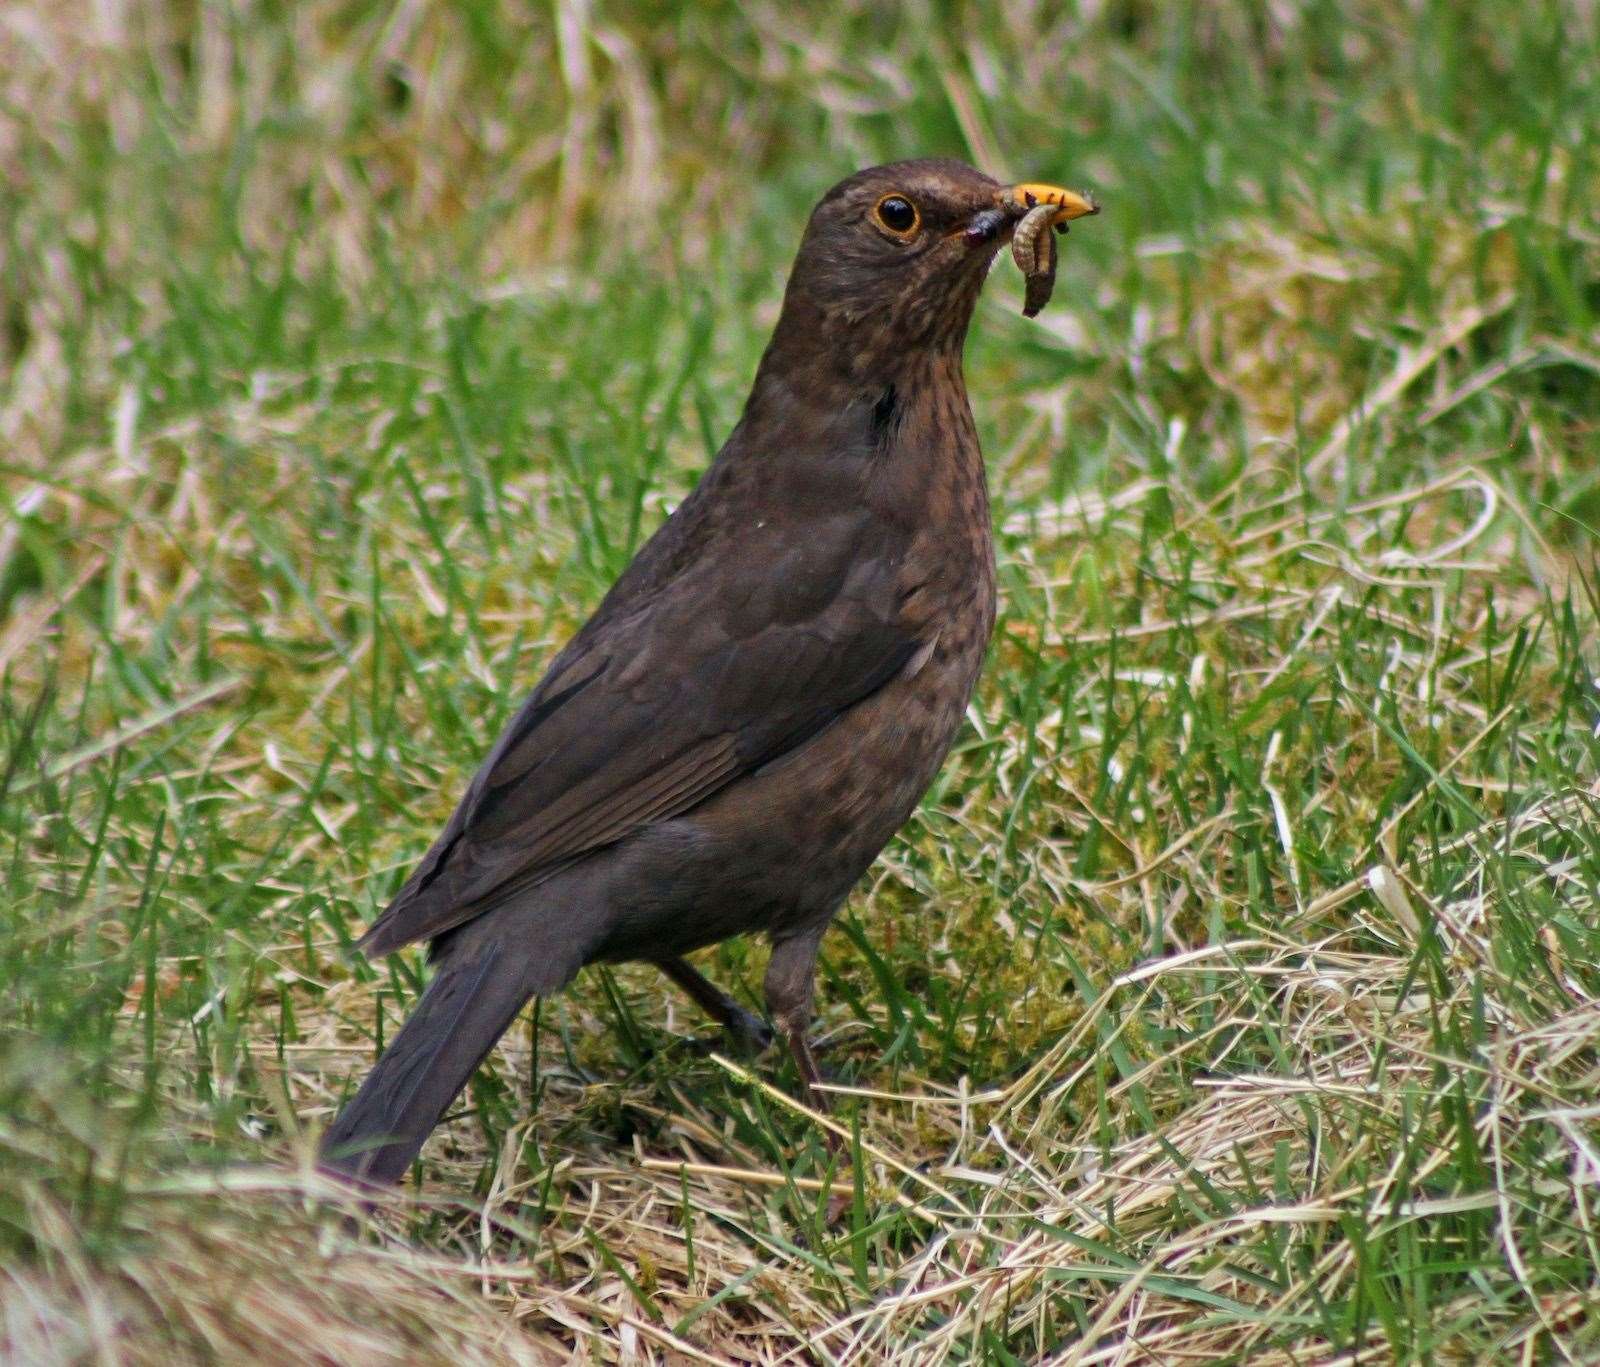 Blackbirds are a common variety encountered in the farm count